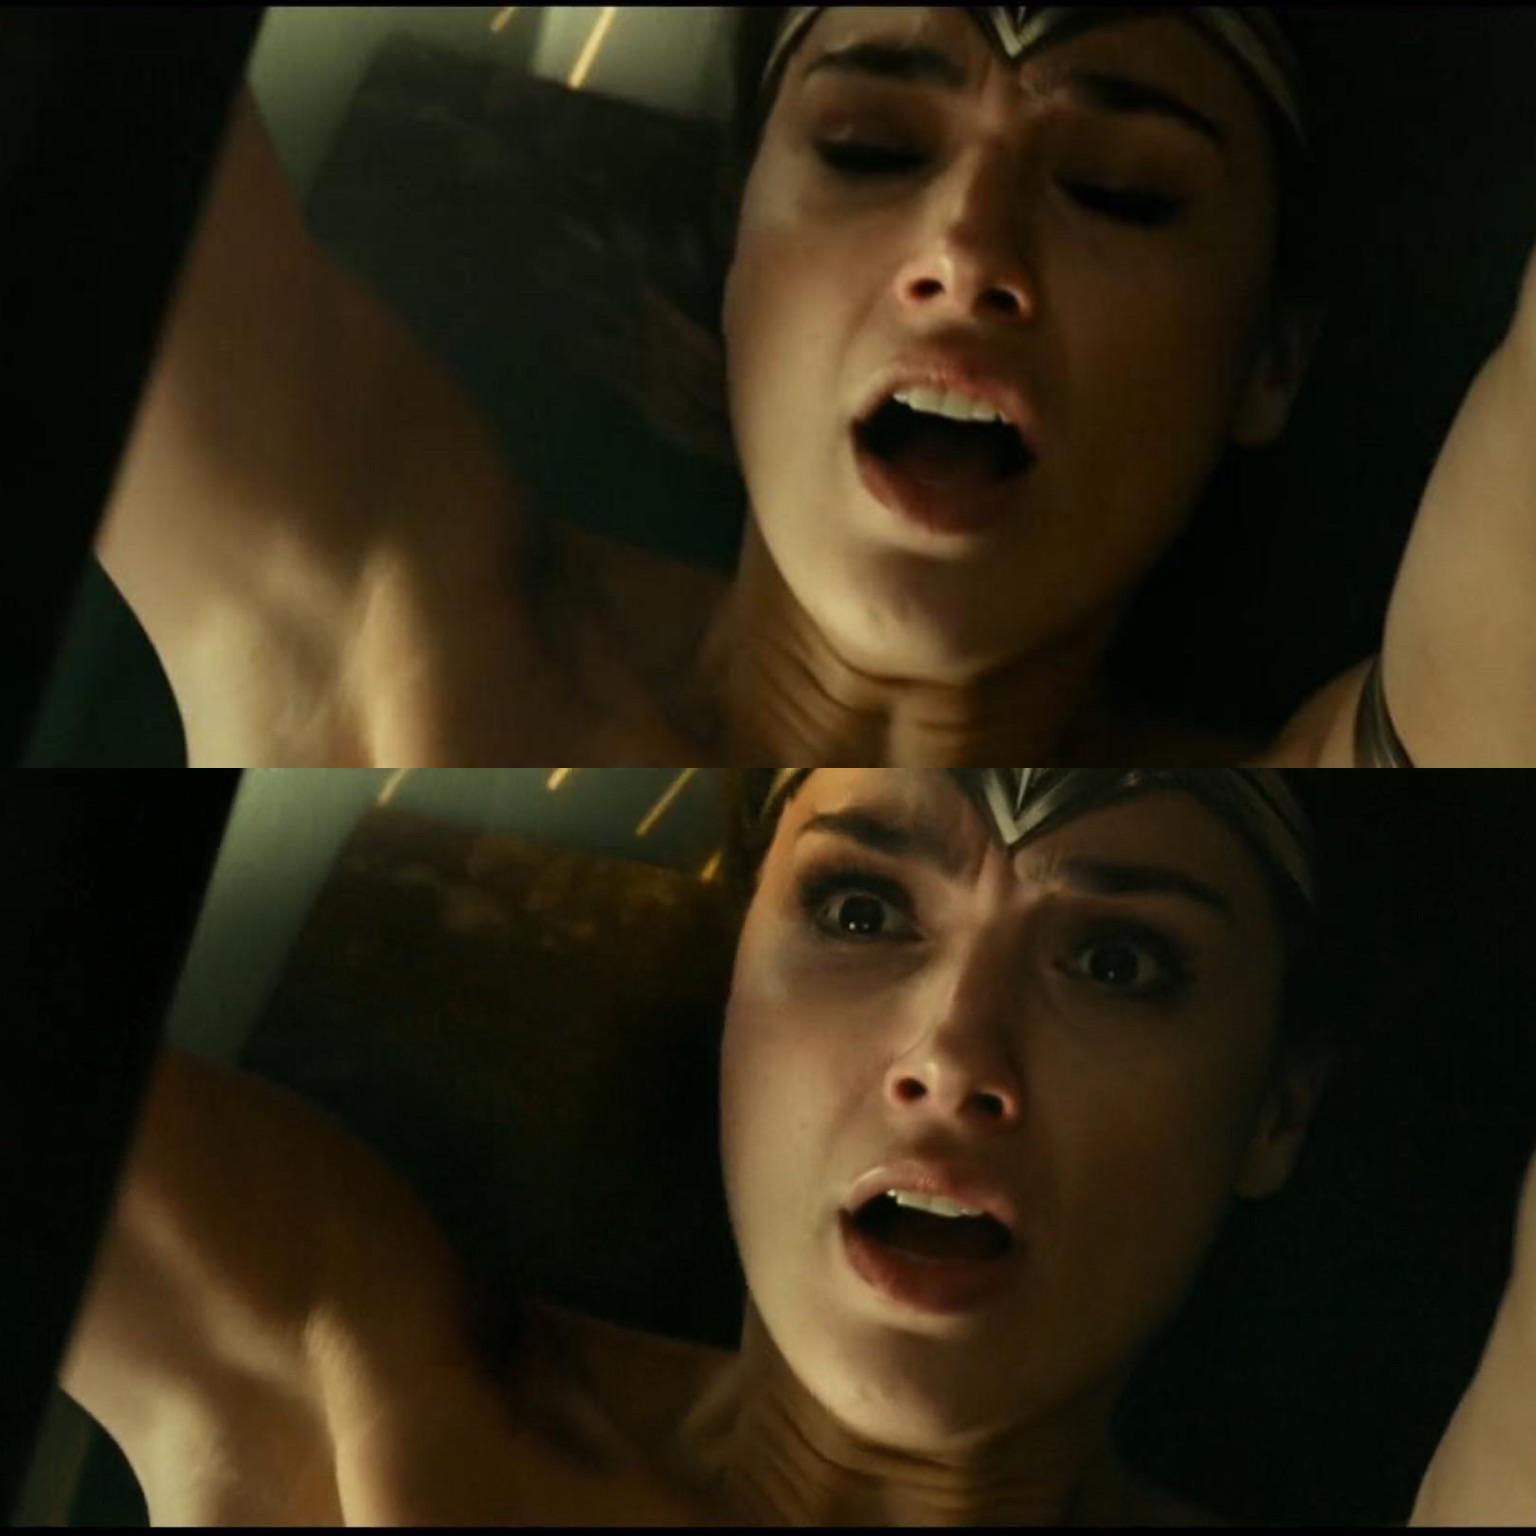 Thrusting a baby making load into Gal Gadot